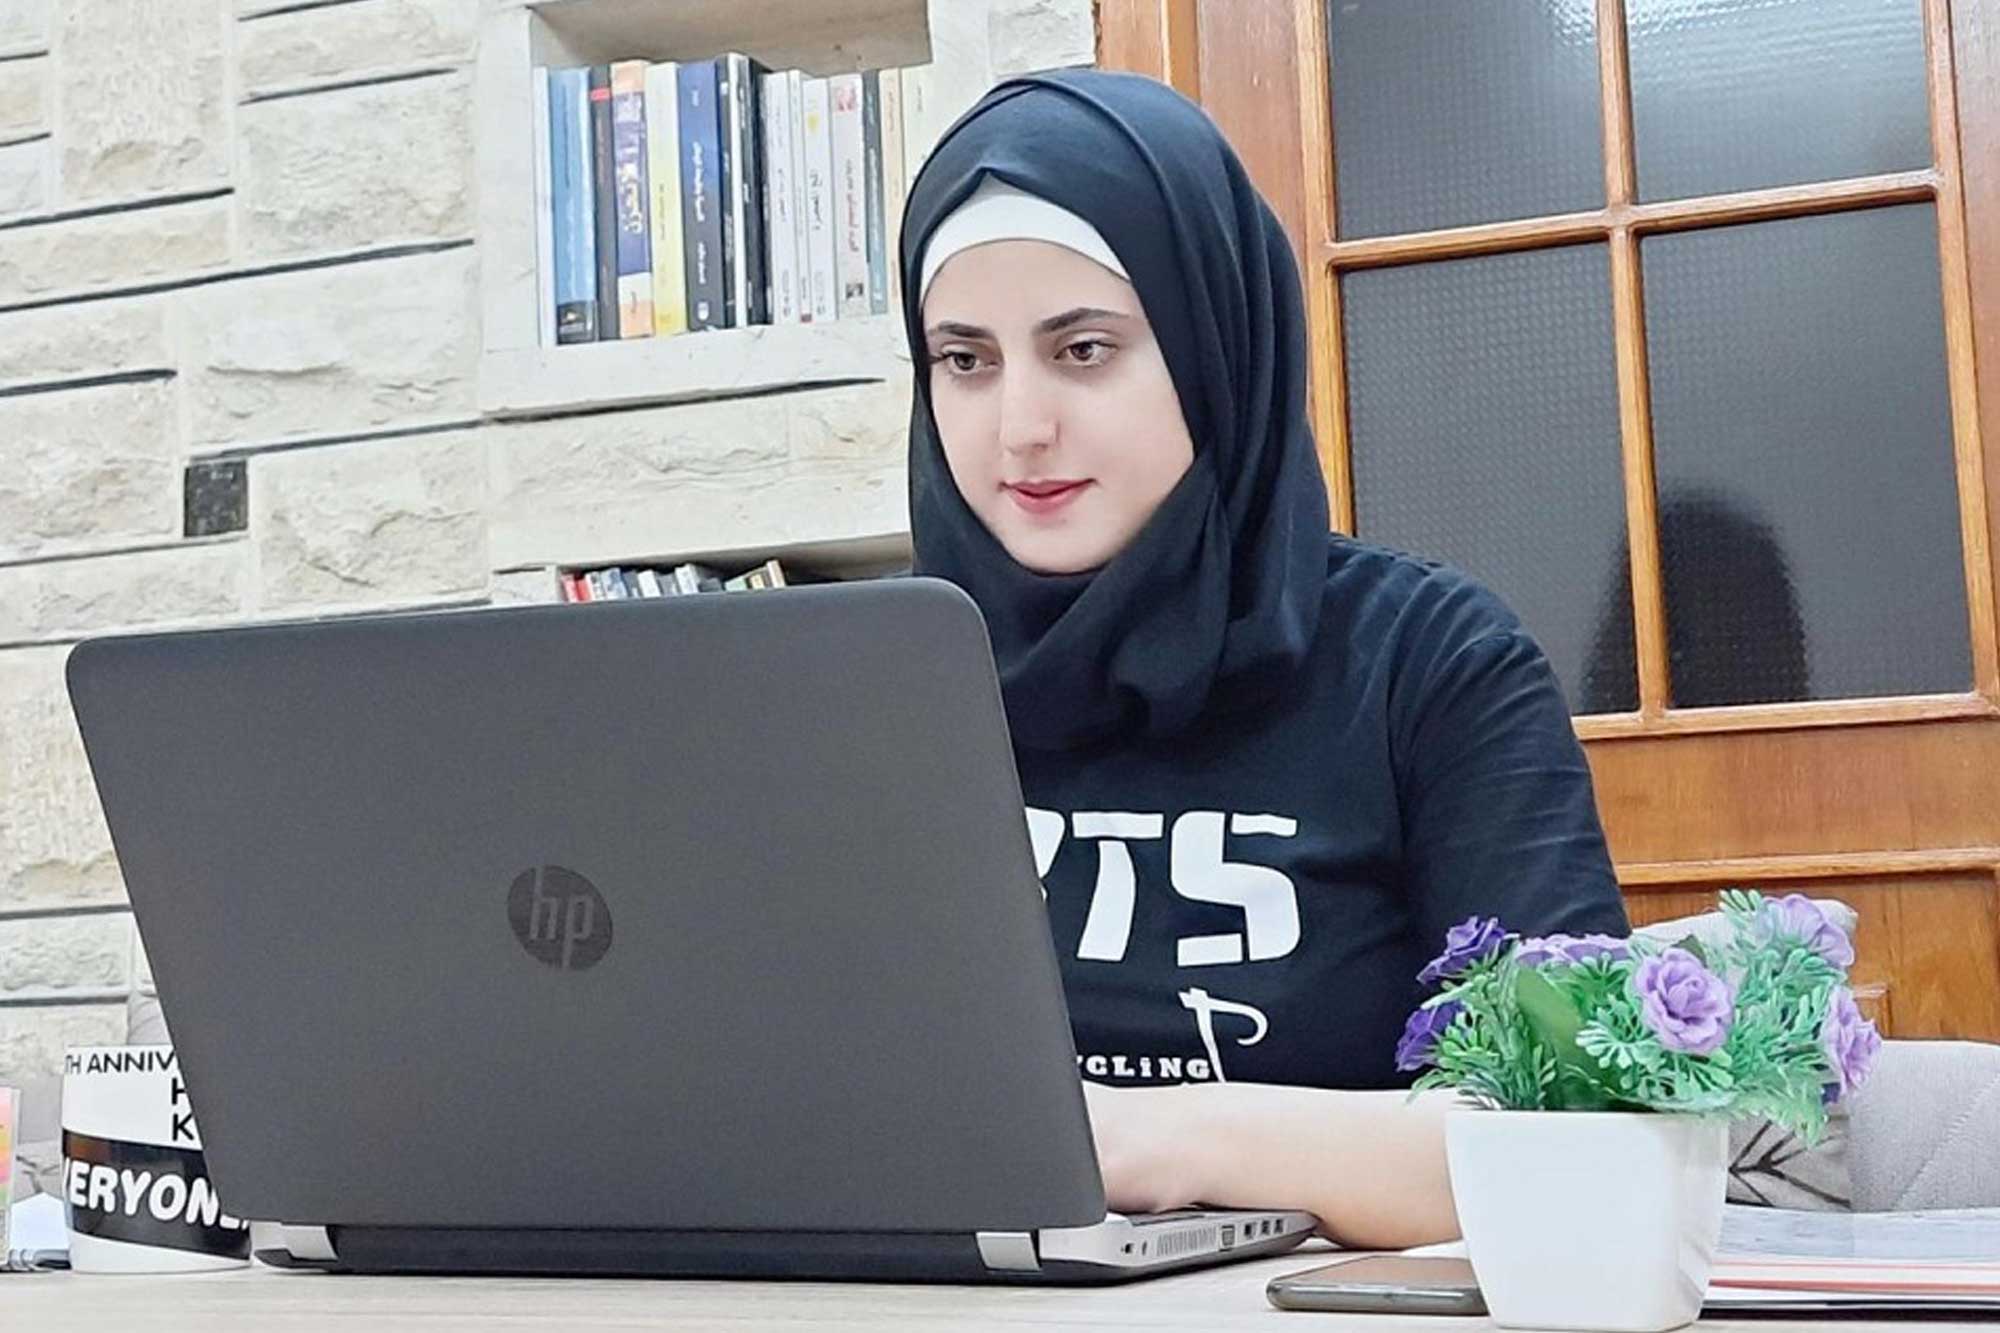 A young woman wearing a veil is working on a laptop.